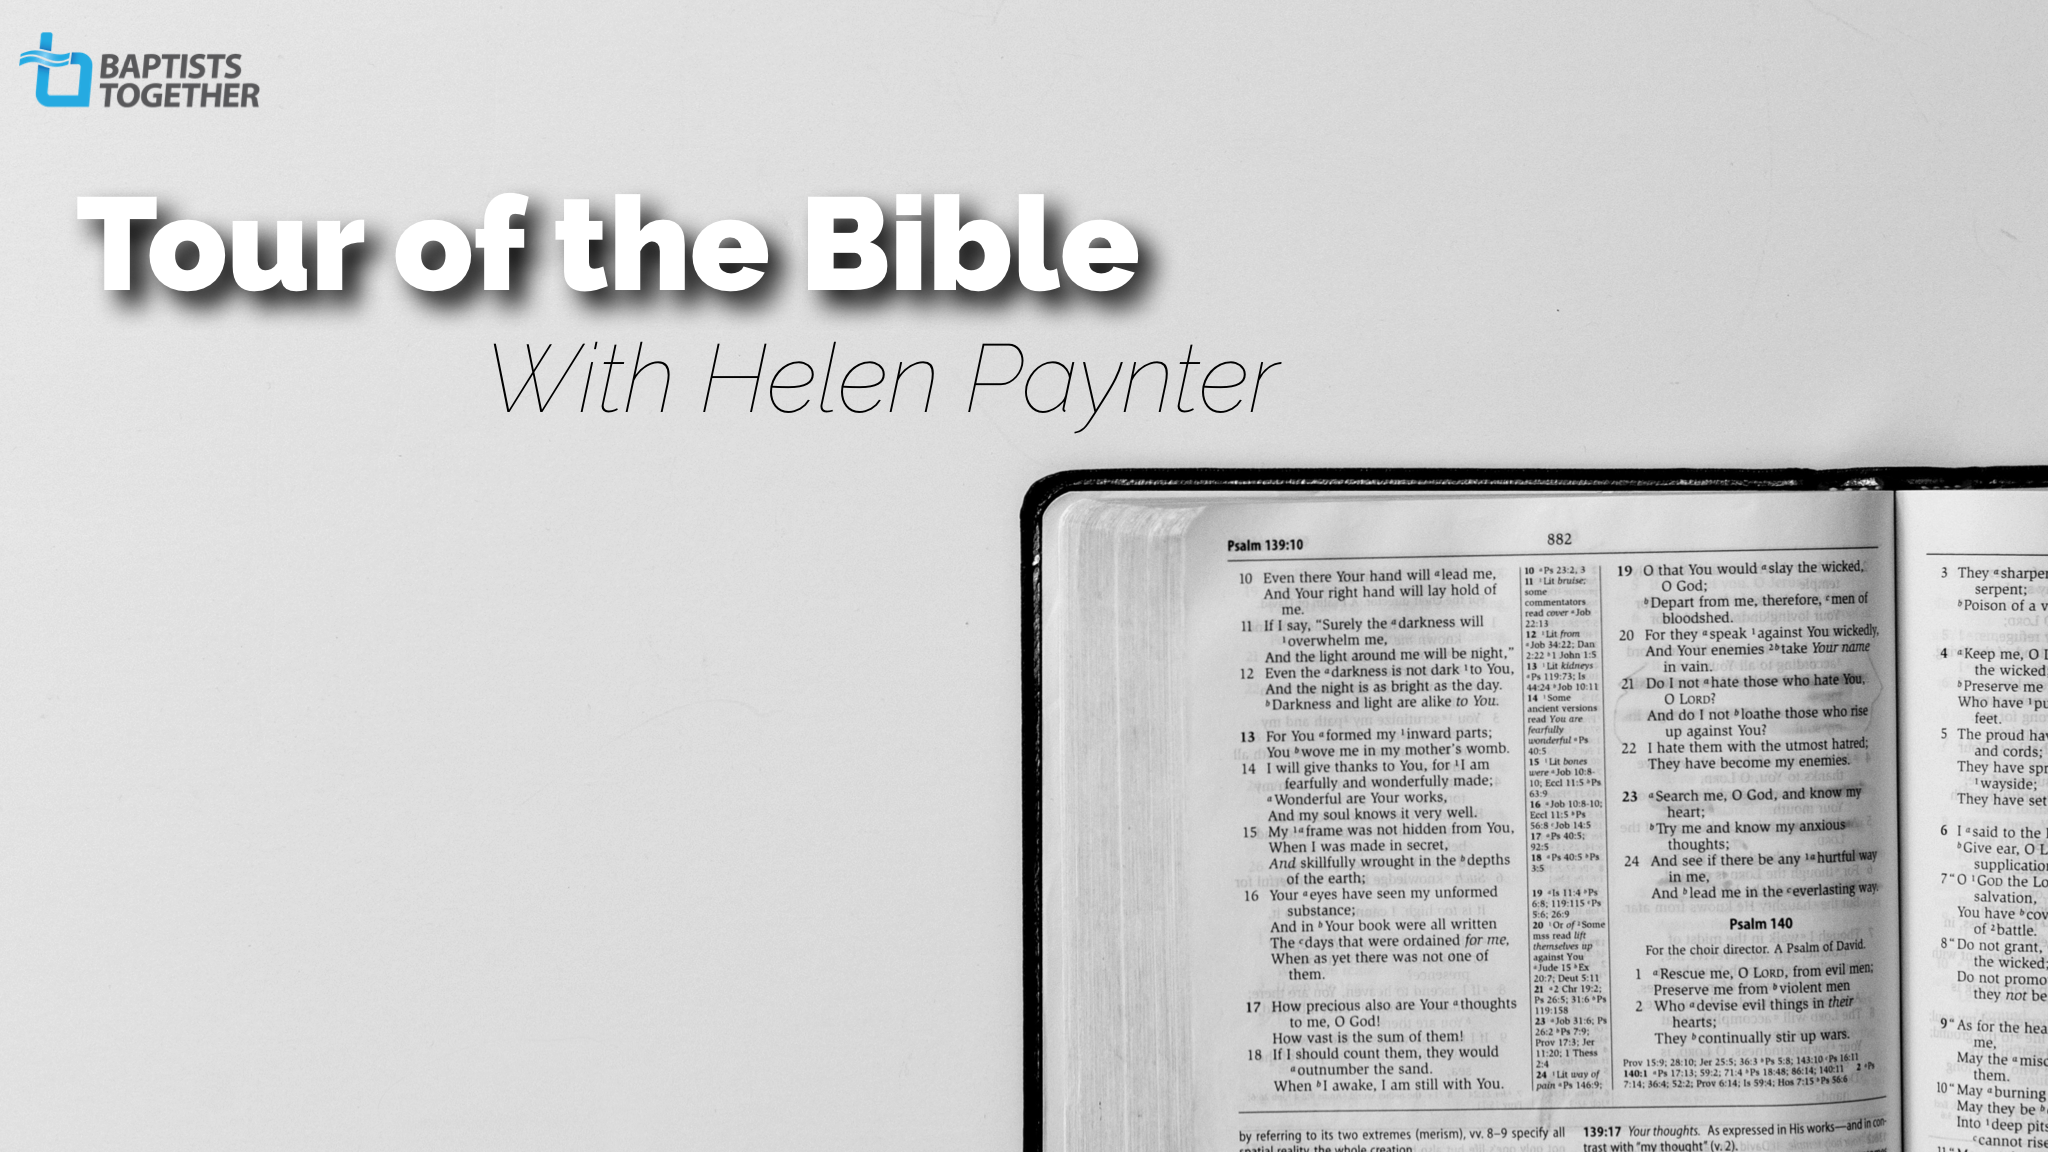 Tour of the Bible with Helen Paynter